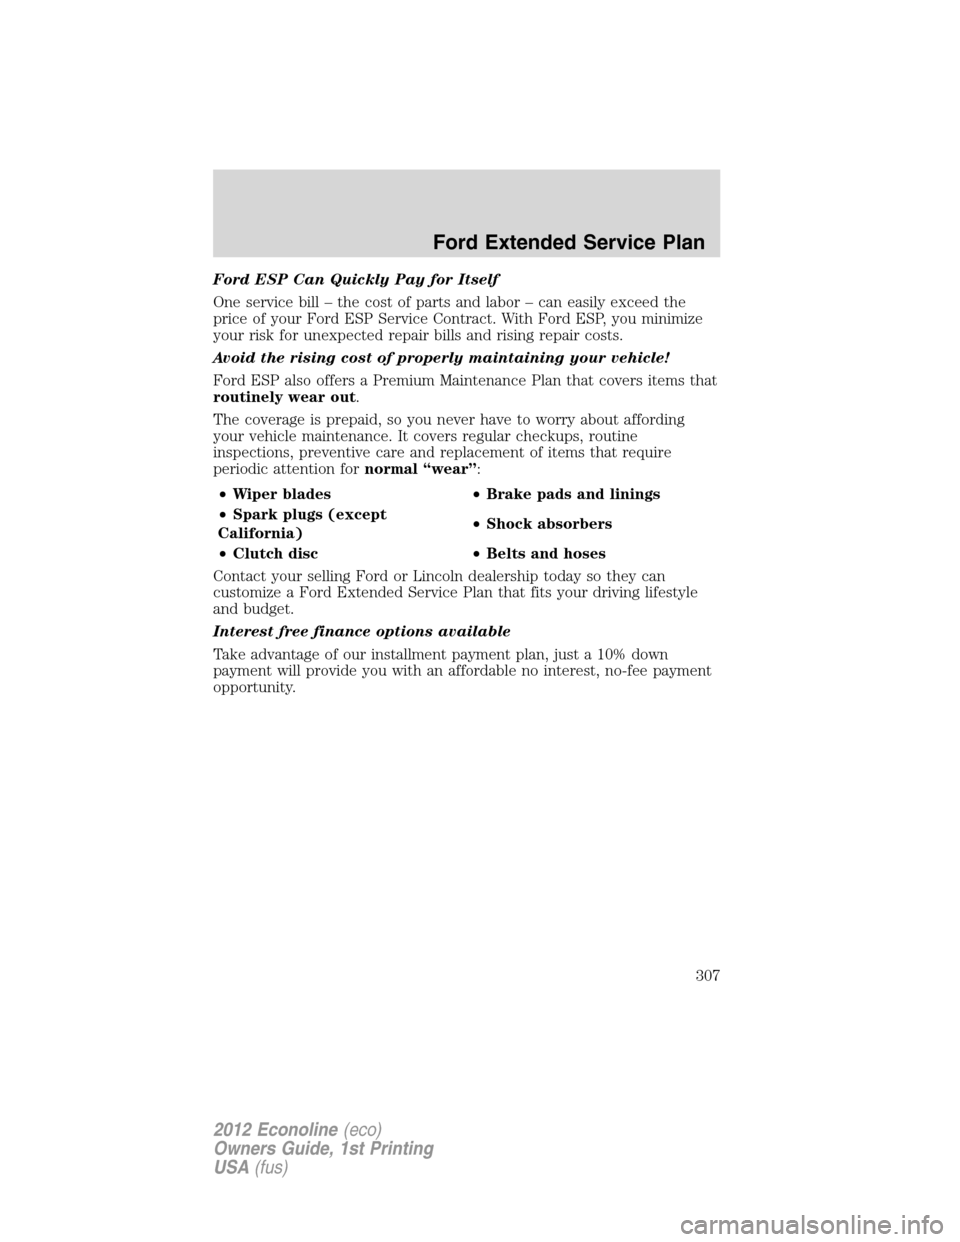 FORD E SERIES 2012 4.G Owners Manual Ford ESP Can Quickly Pay for Itself
One service bill – the cost of parts and labor – can easily exceed the
price of your Ford ESP Service Contract. With Ford ESP, you minimize
your risk for unexpe